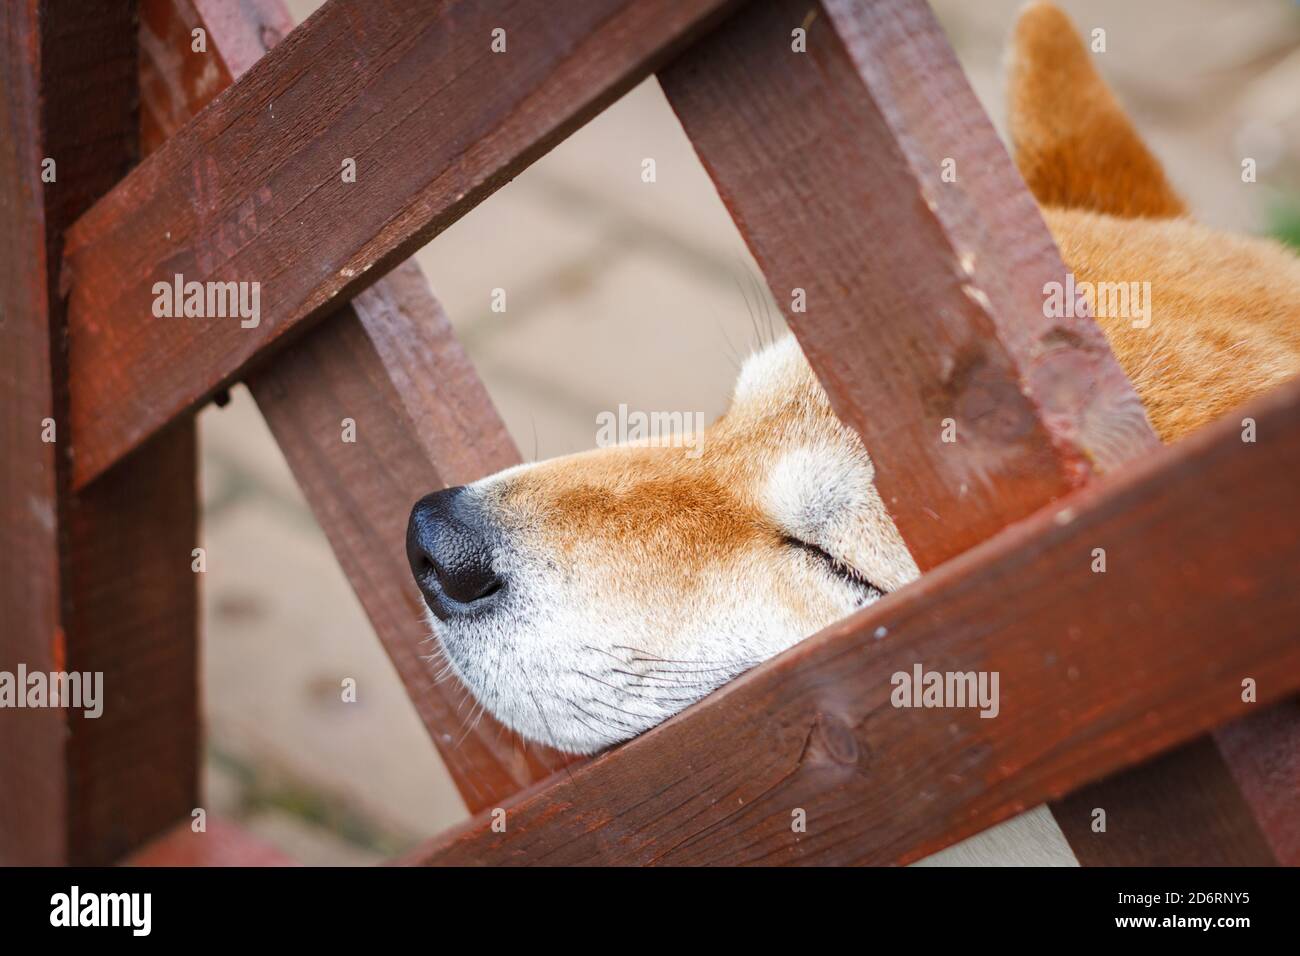 A Japanese dog of breed Shiba Inu stuck his nose out of a wooden fence. Concept: Japanese small size Shiba Ken dog misses the owner and waits for him Stock Photo